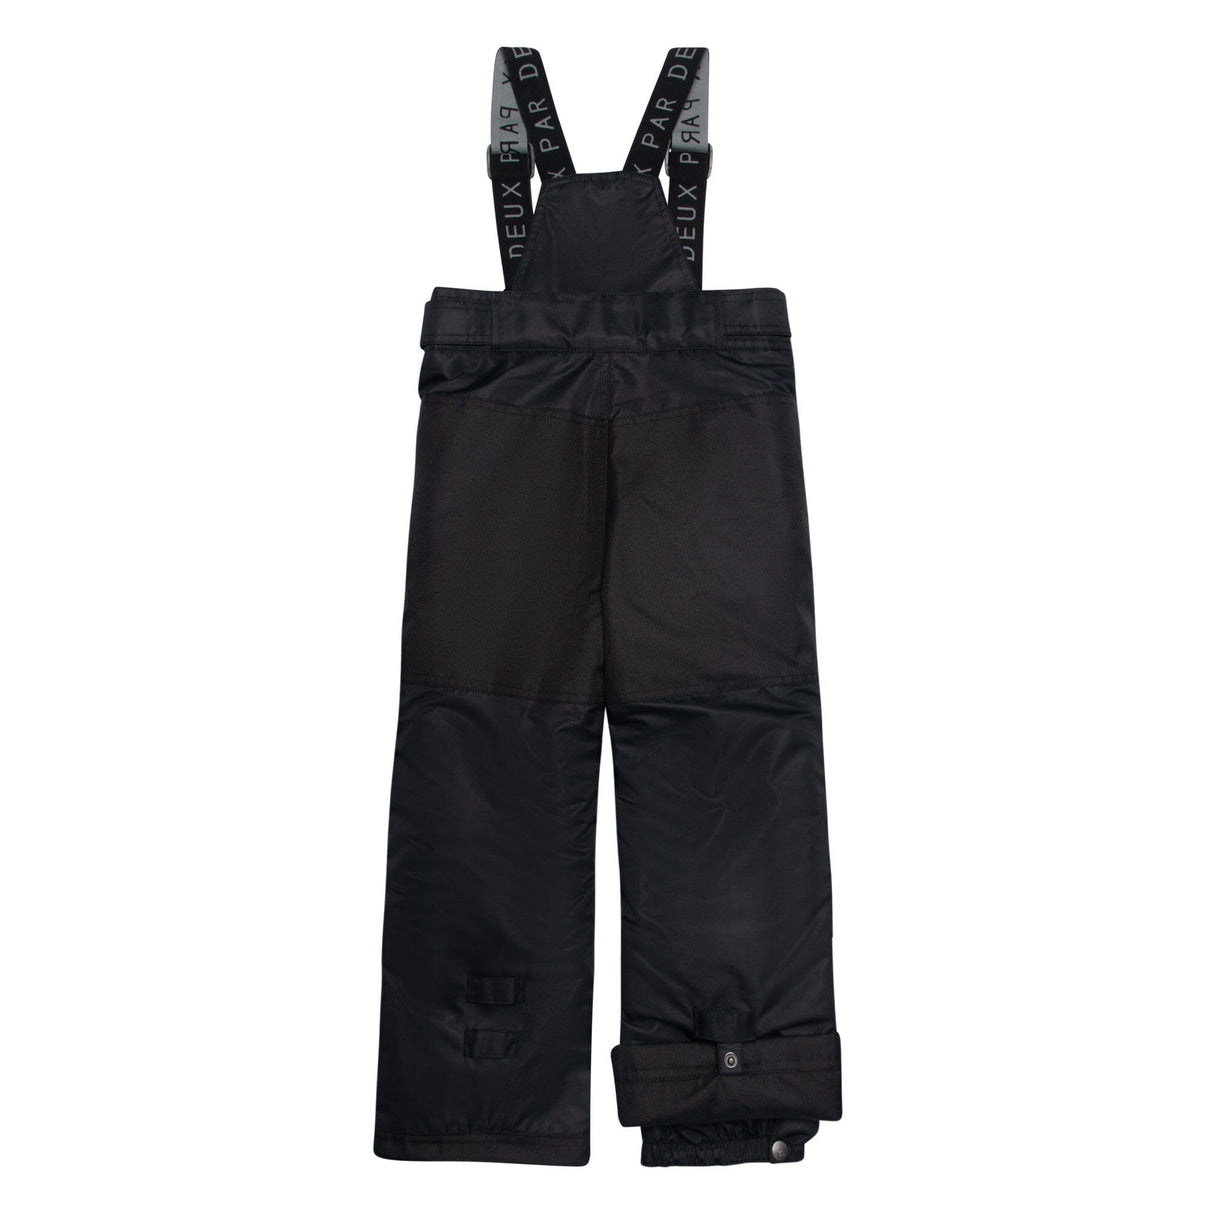 Two Piece Snowsuit Black With Forest Print-7